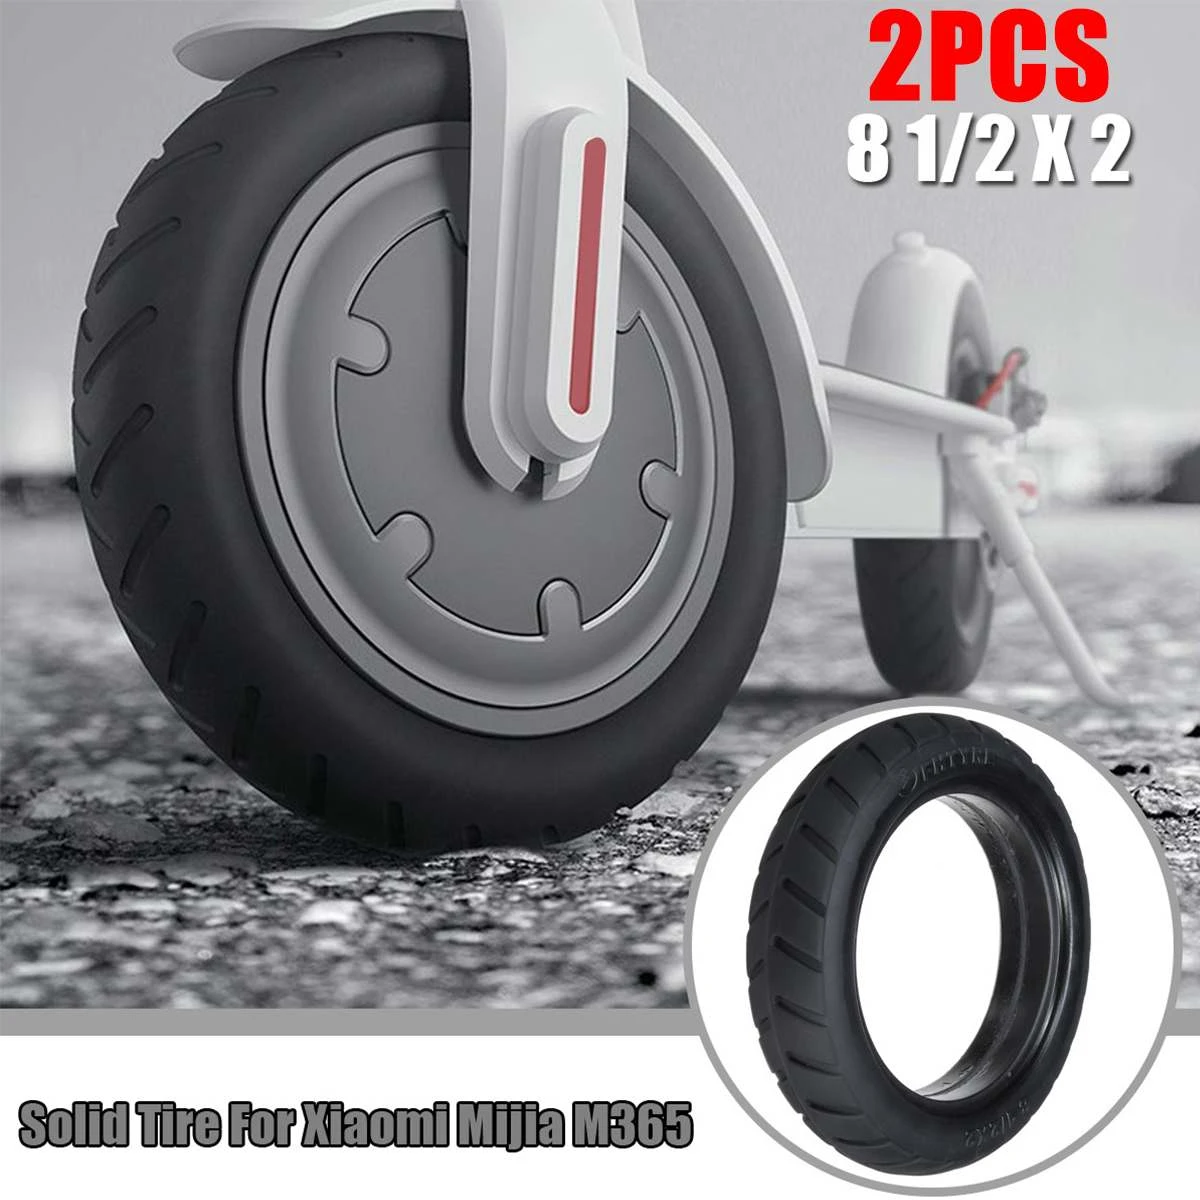 For Xiaomi Mijia M365 Tyre Electric Scooter Tires 8 1/2x2 Durable Thick Wheels Solid Outer Tyres m365 Accessories